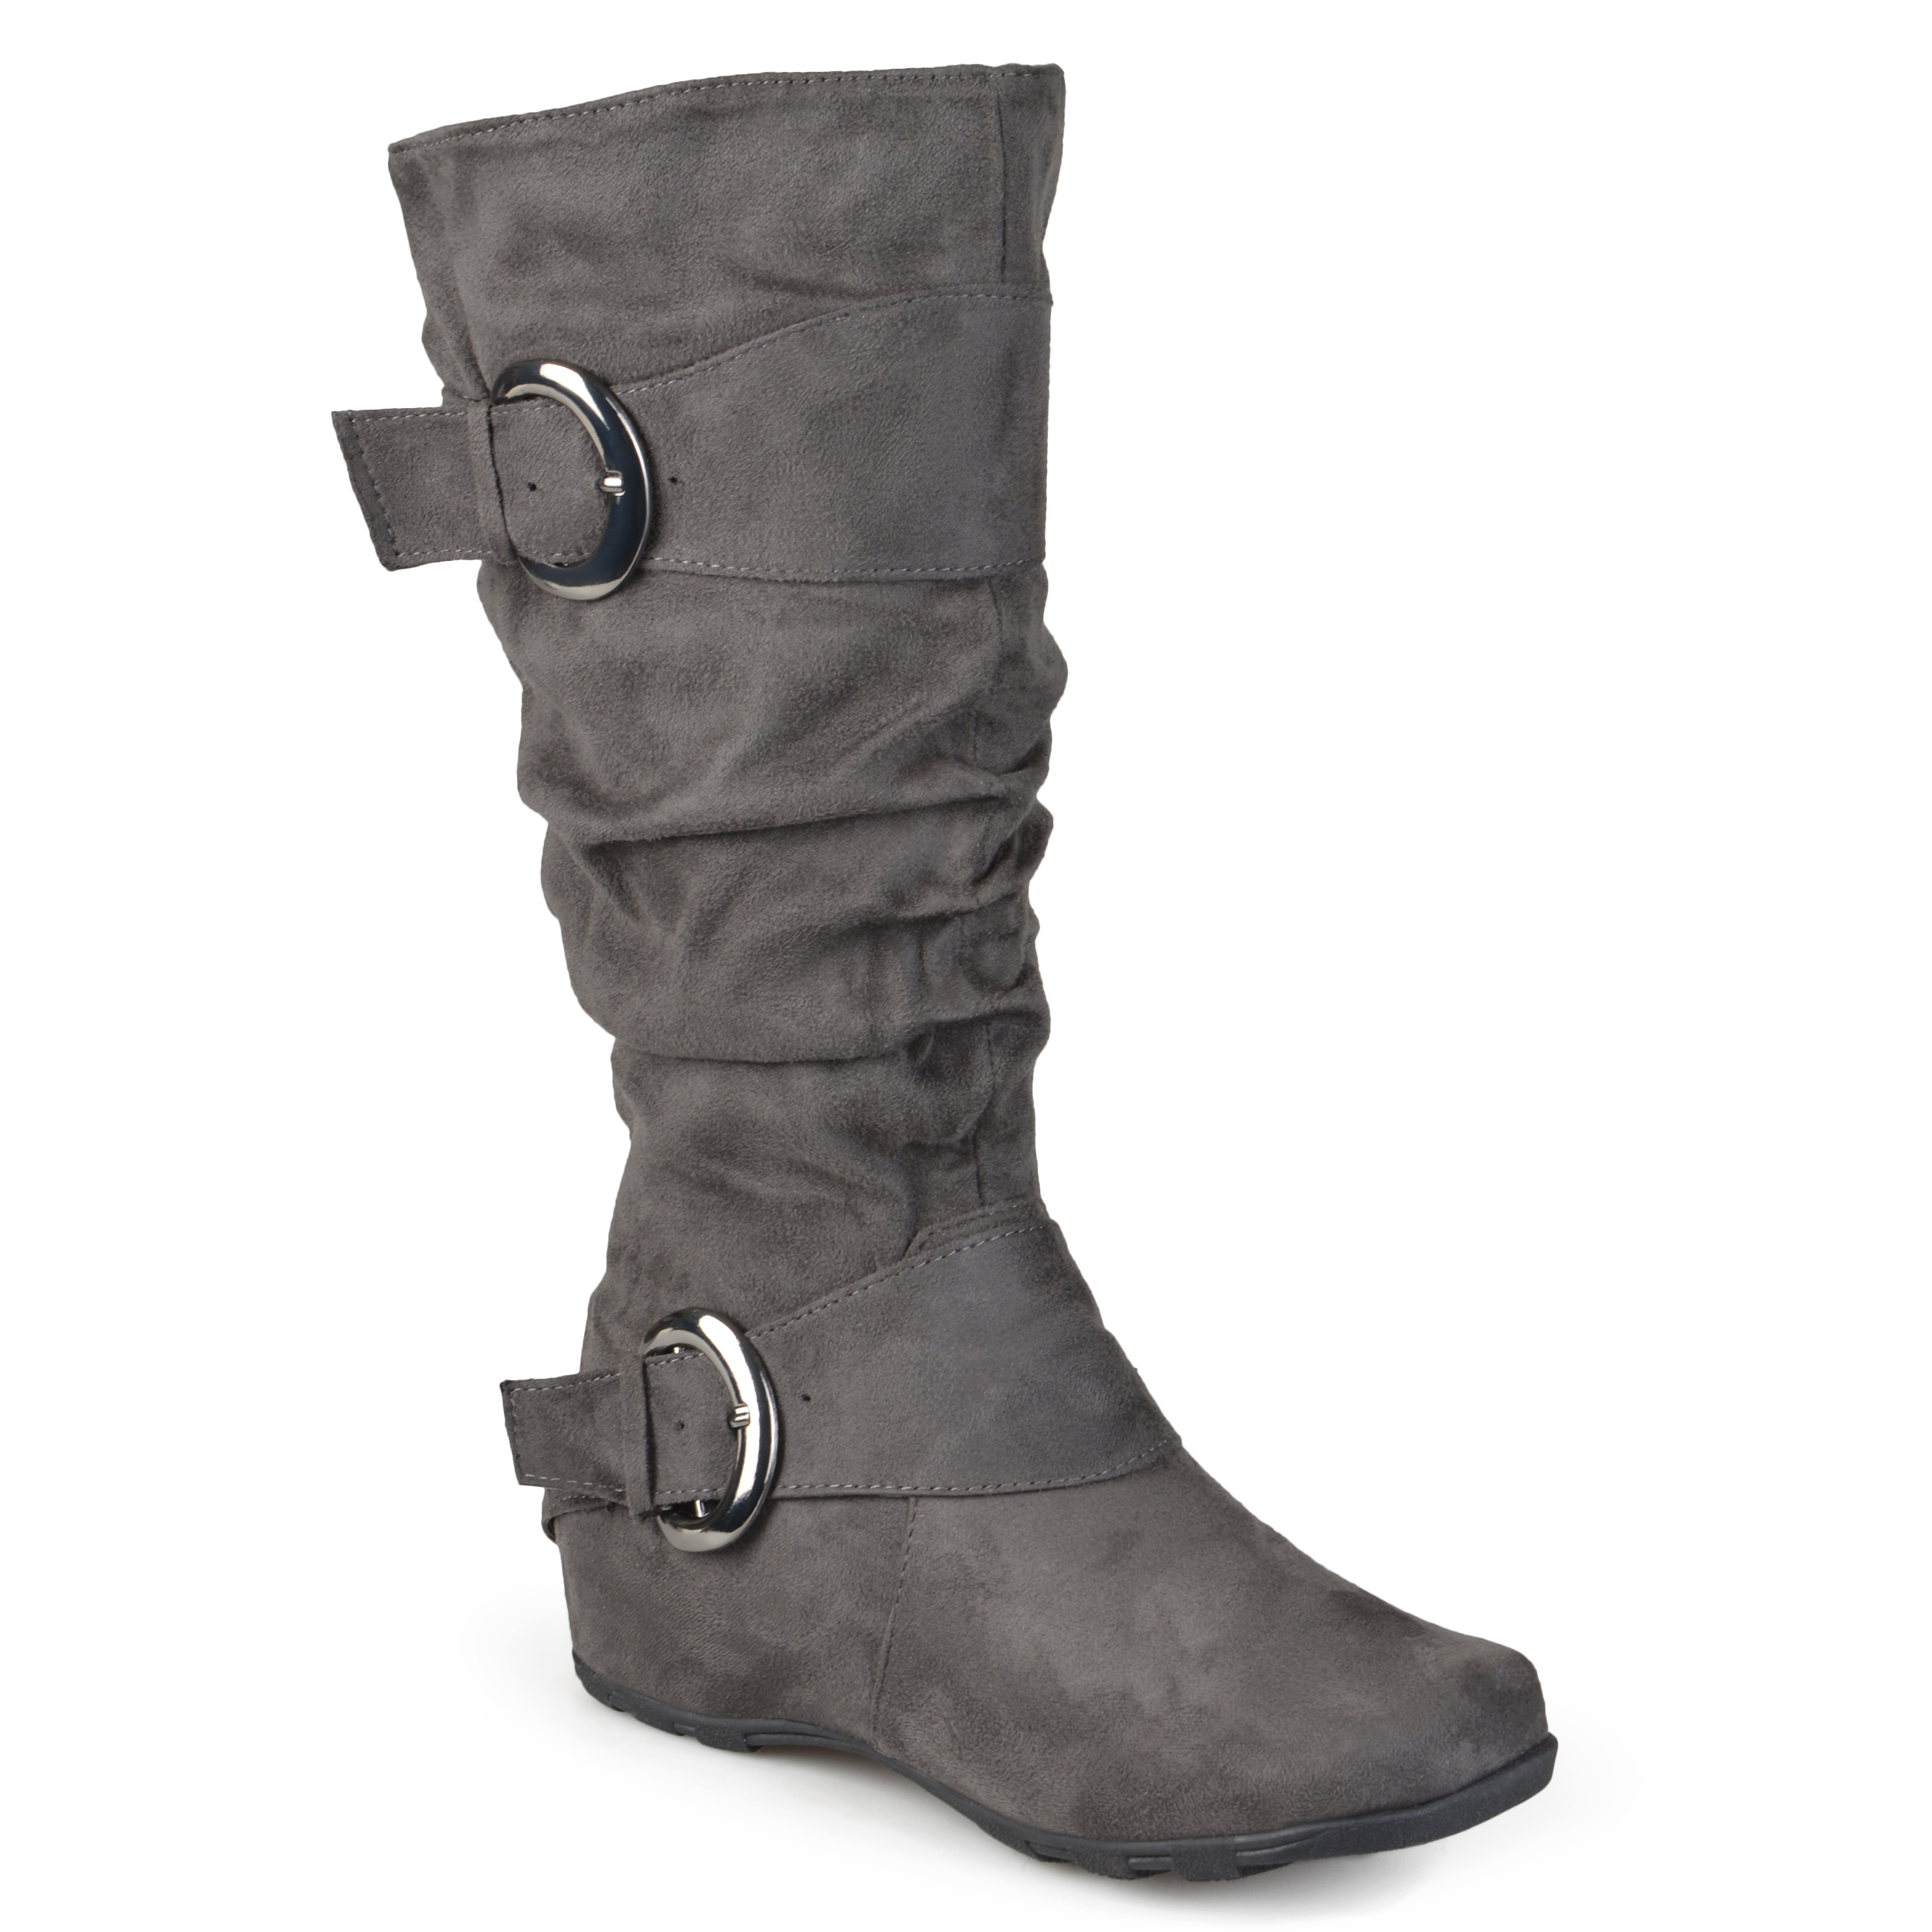 Women's Wide-Calf Buckle Knee-High Slouch Microsuede Boot - image 1 of 8